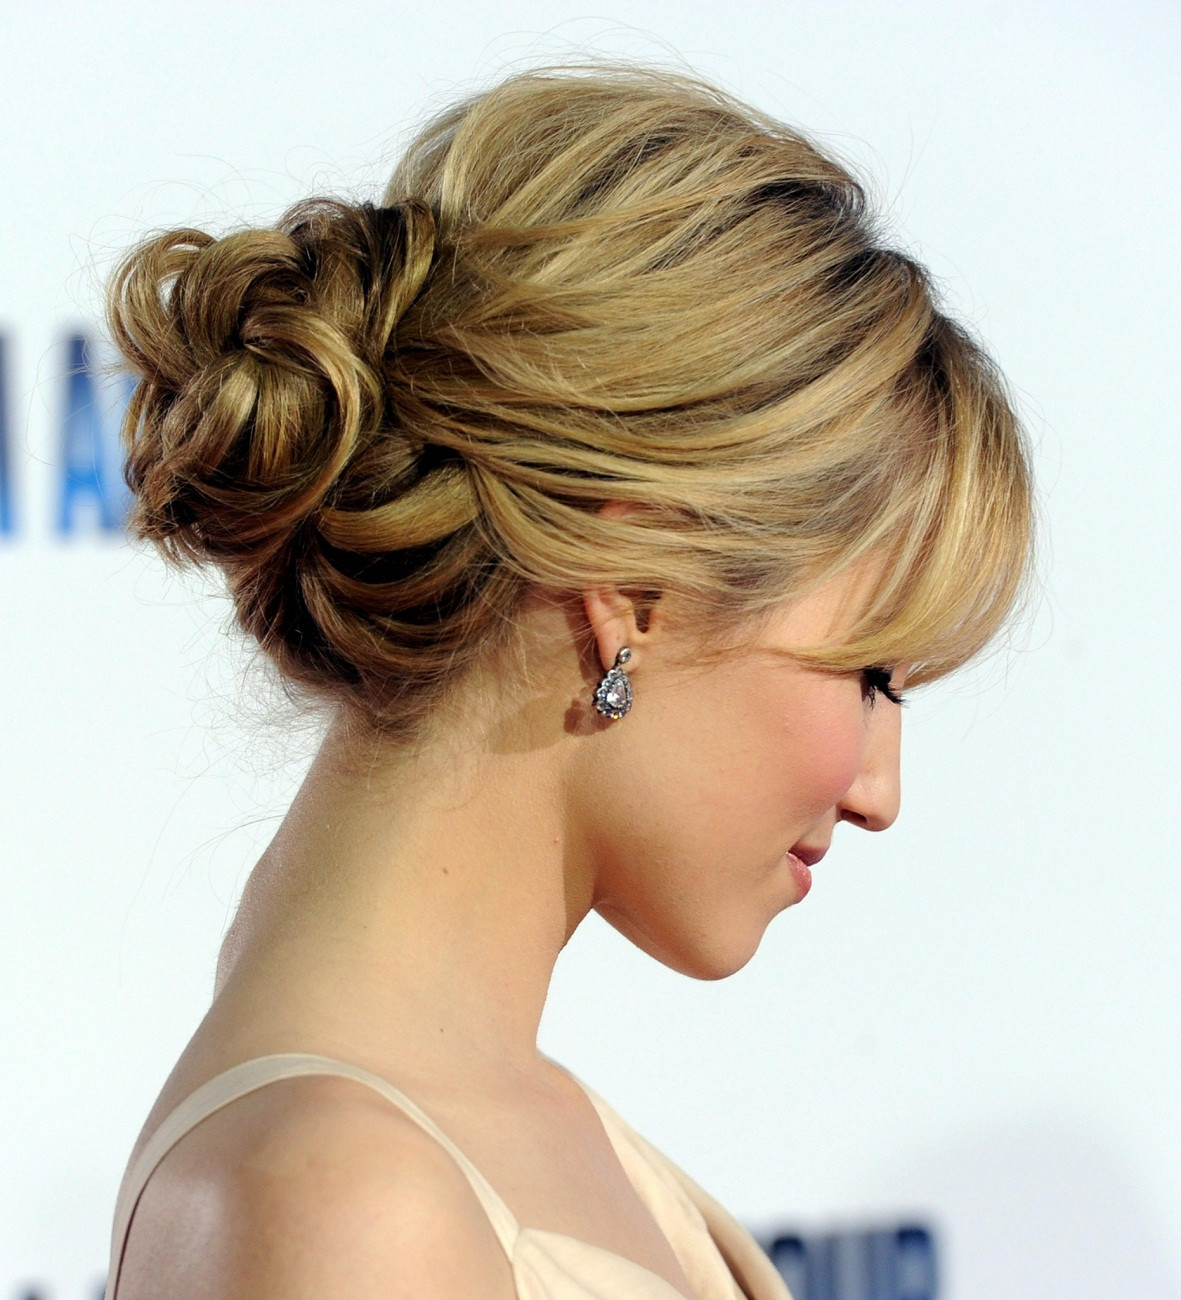 Hairstyles For Prom Medium Hair
 Attractive Prom Hairstyles for Medium Hair